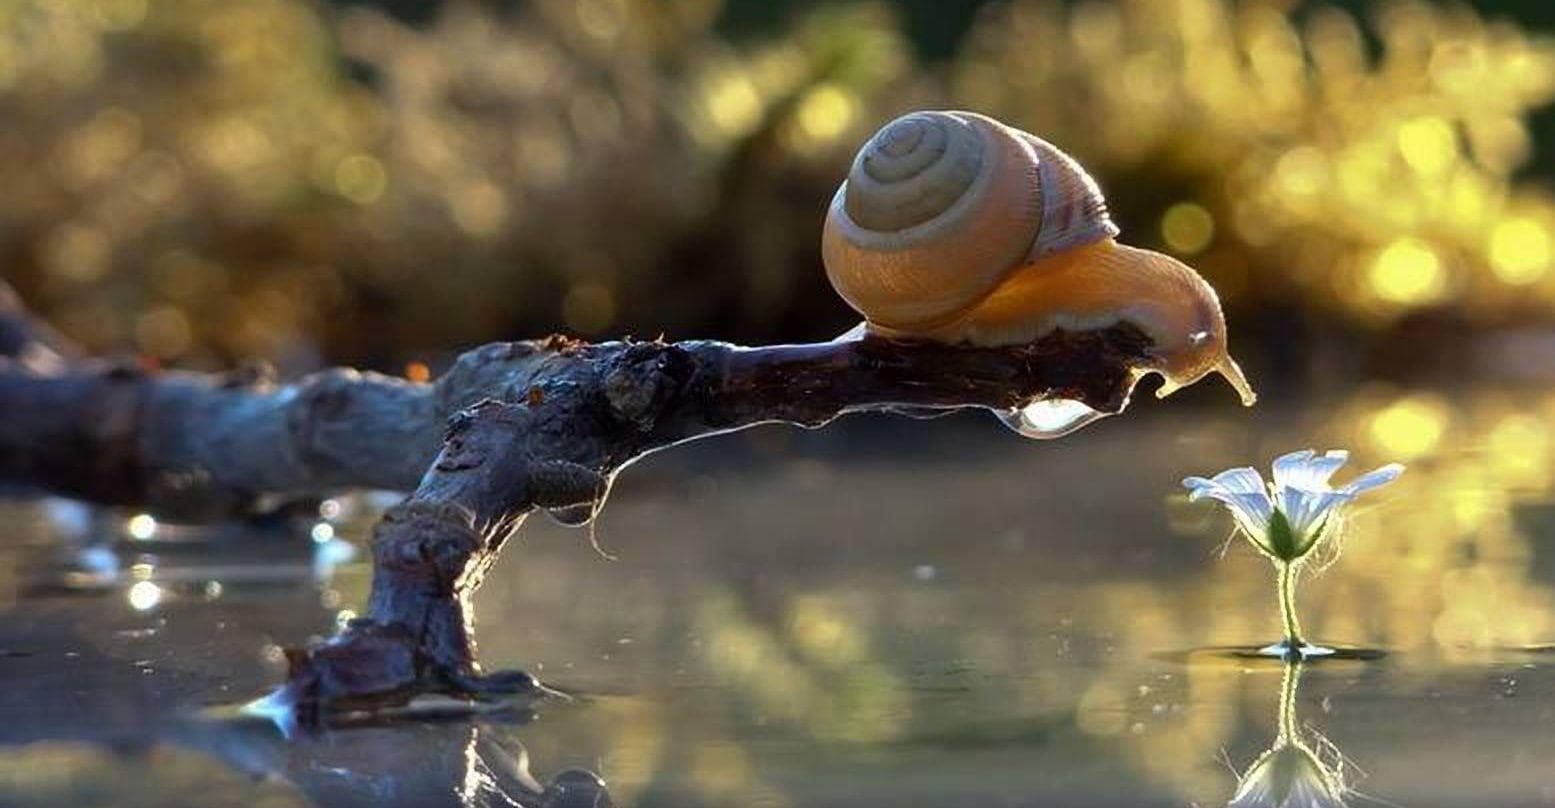 15 Ridiculously Cute Snail Photos That Will Make Your Heart Melt